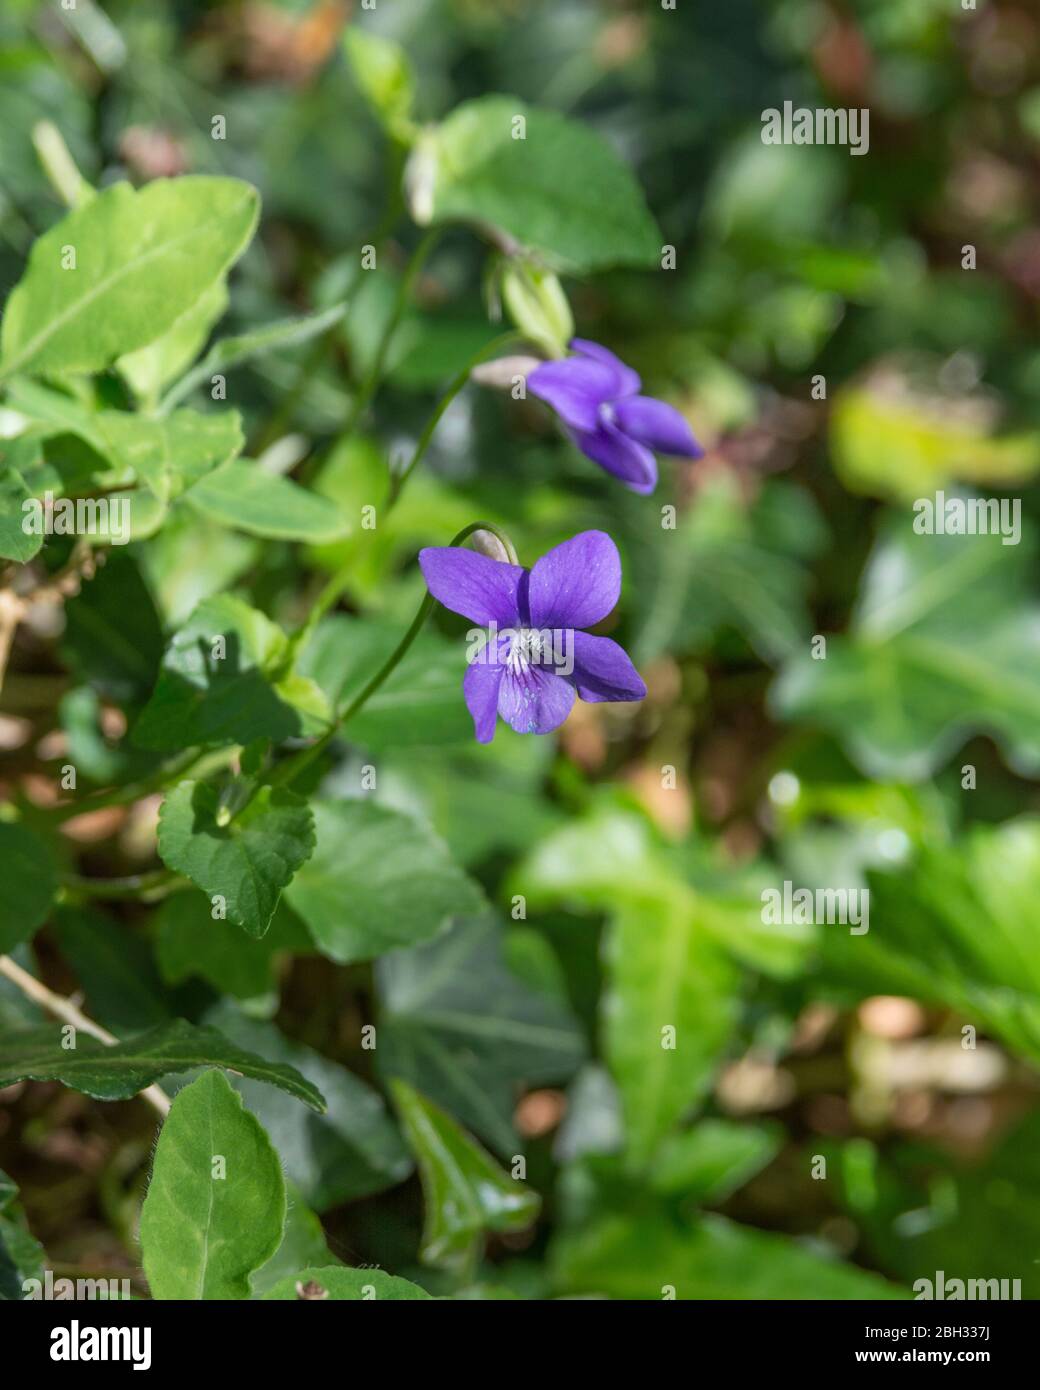 Flower and leaves of Dog Violet / Viola riviniana in Spring sunshine. Violet was a medicinal plant once used in herbal remedies. Stock Photo